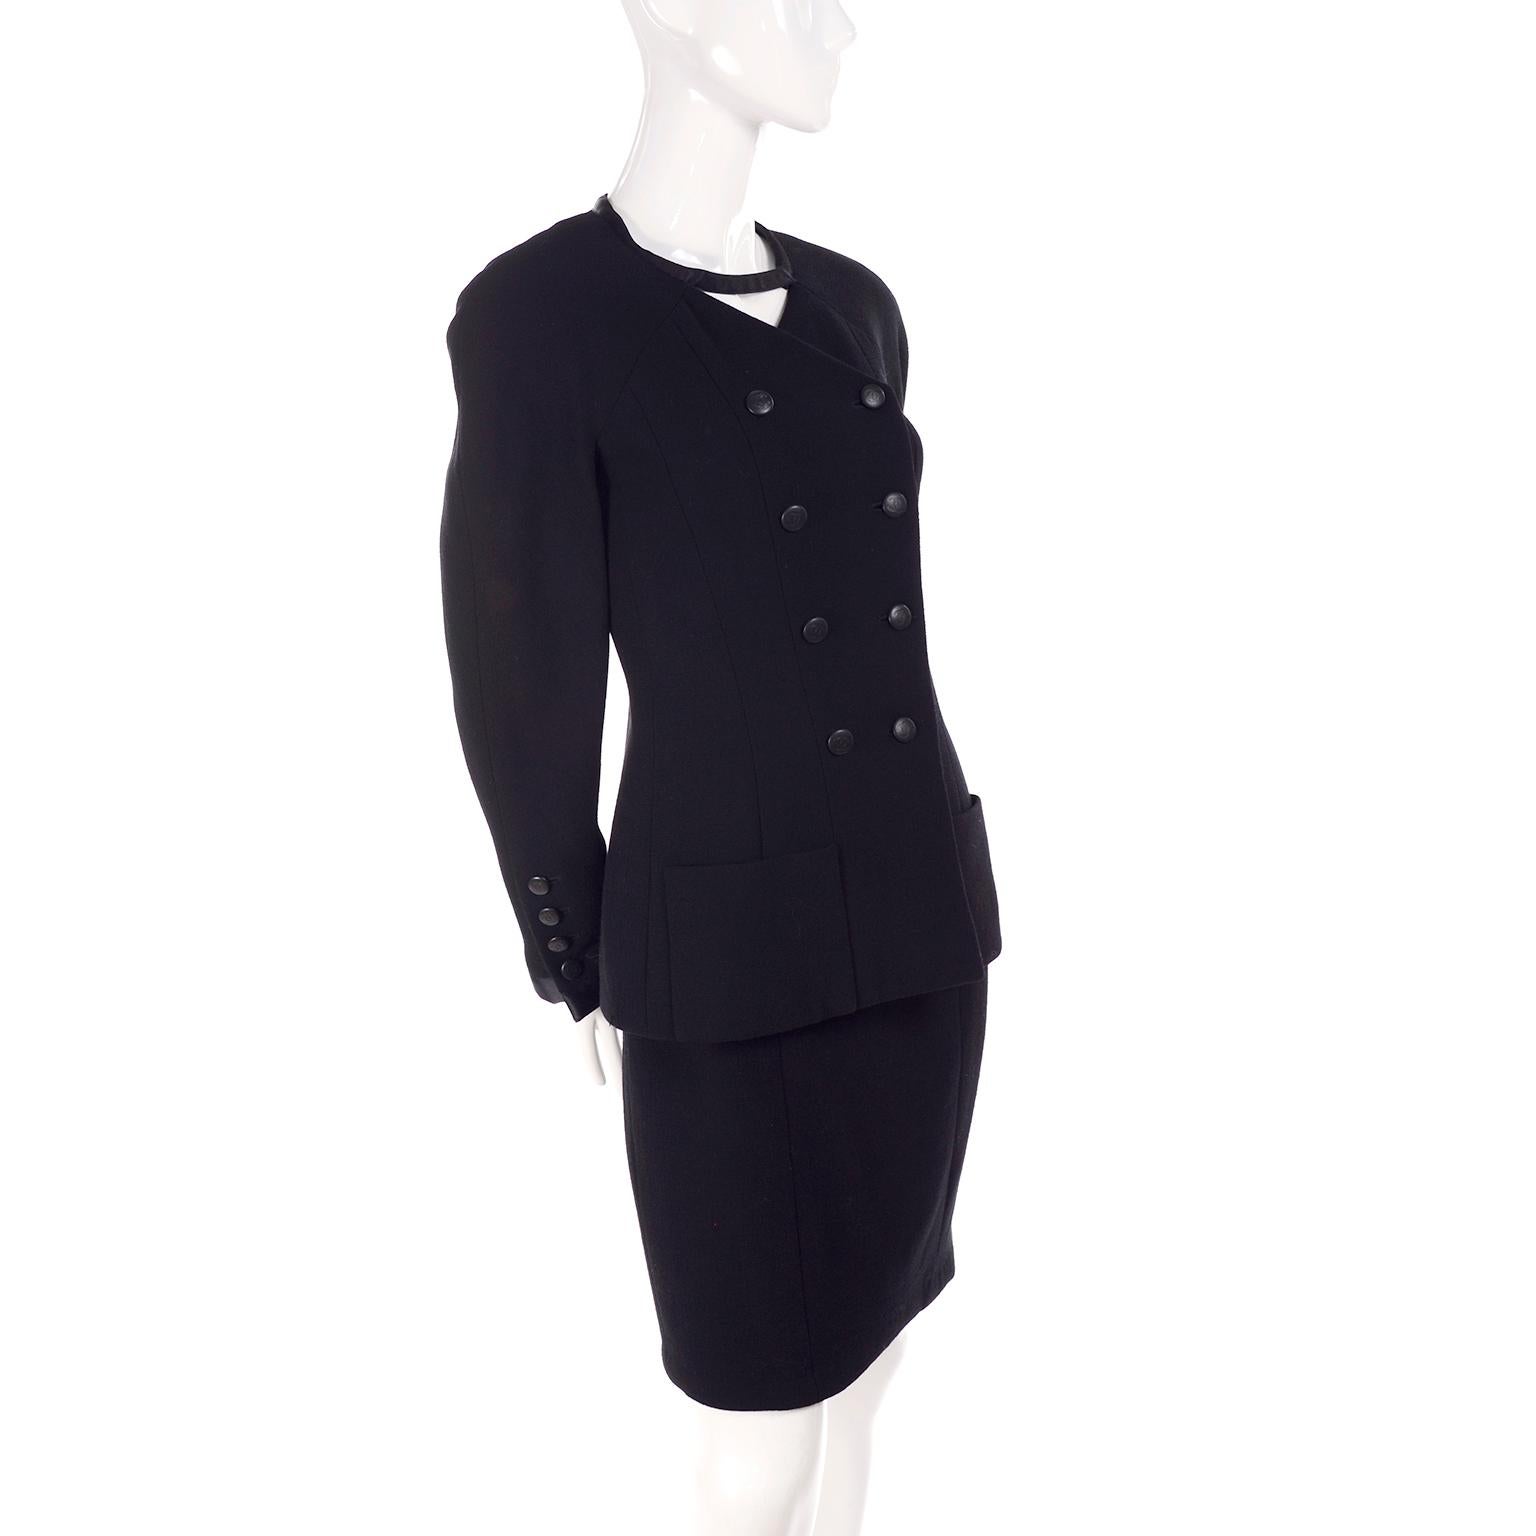 Chanel Jacket and Skirt Suit in Black Wool With Silk Lining Cruise Resort 1996 For Sale 11